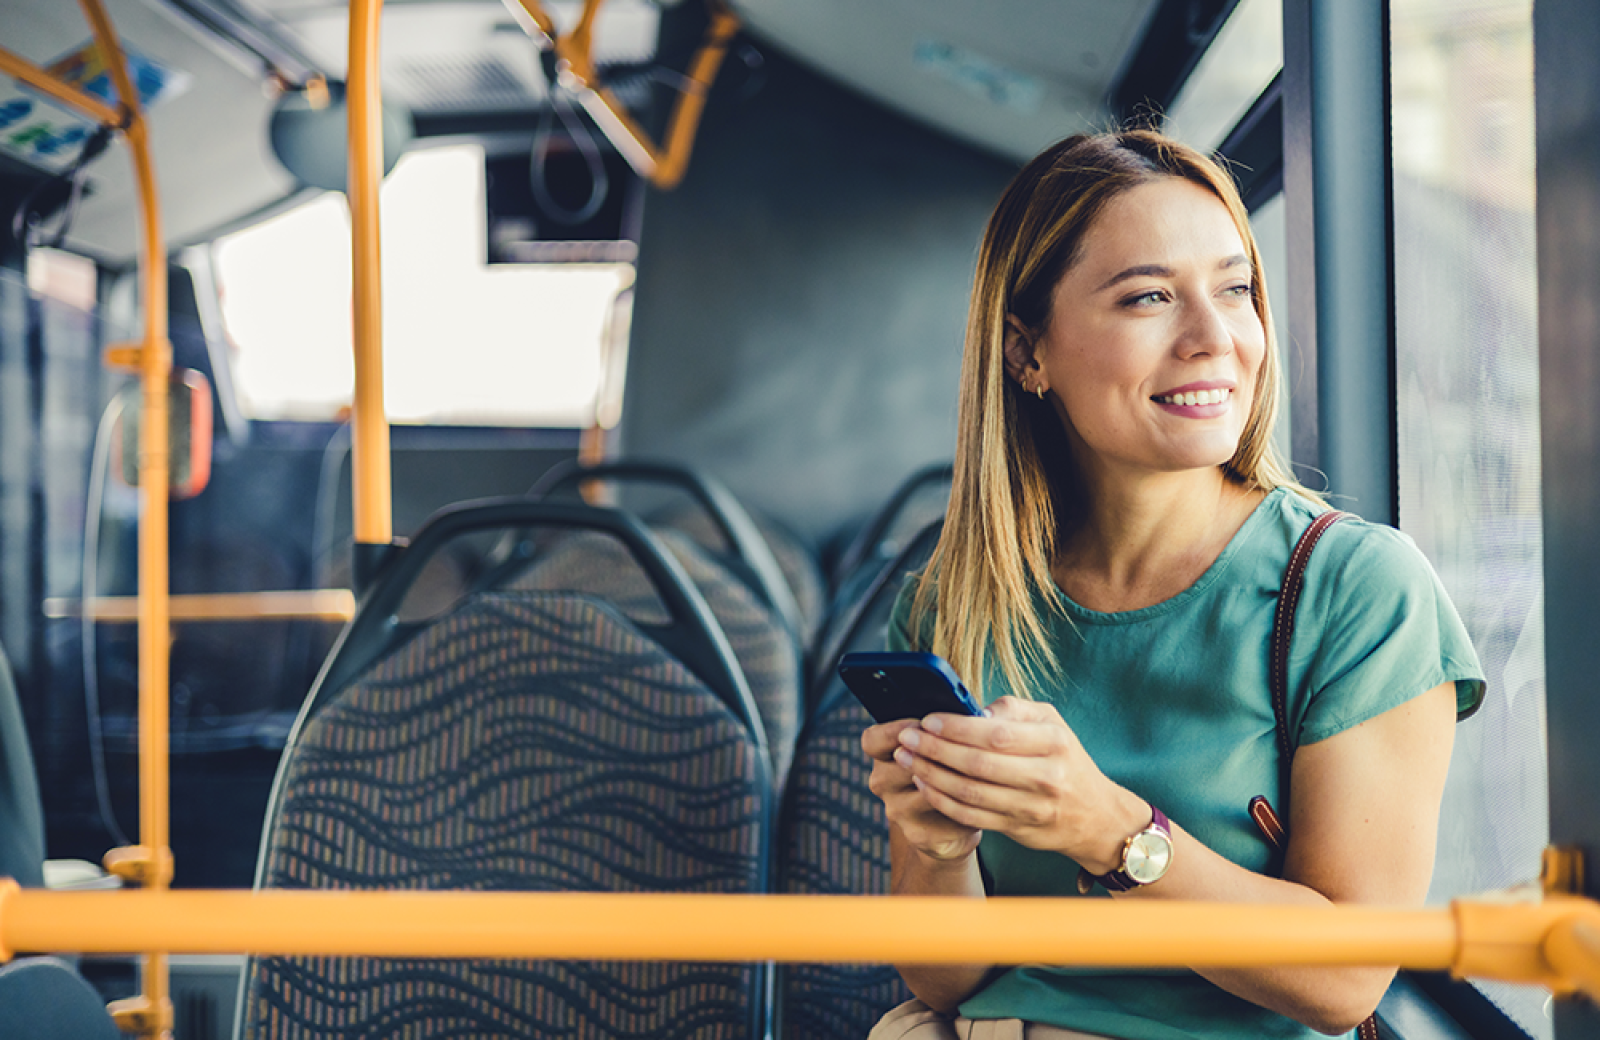 A smiling woman on a bus